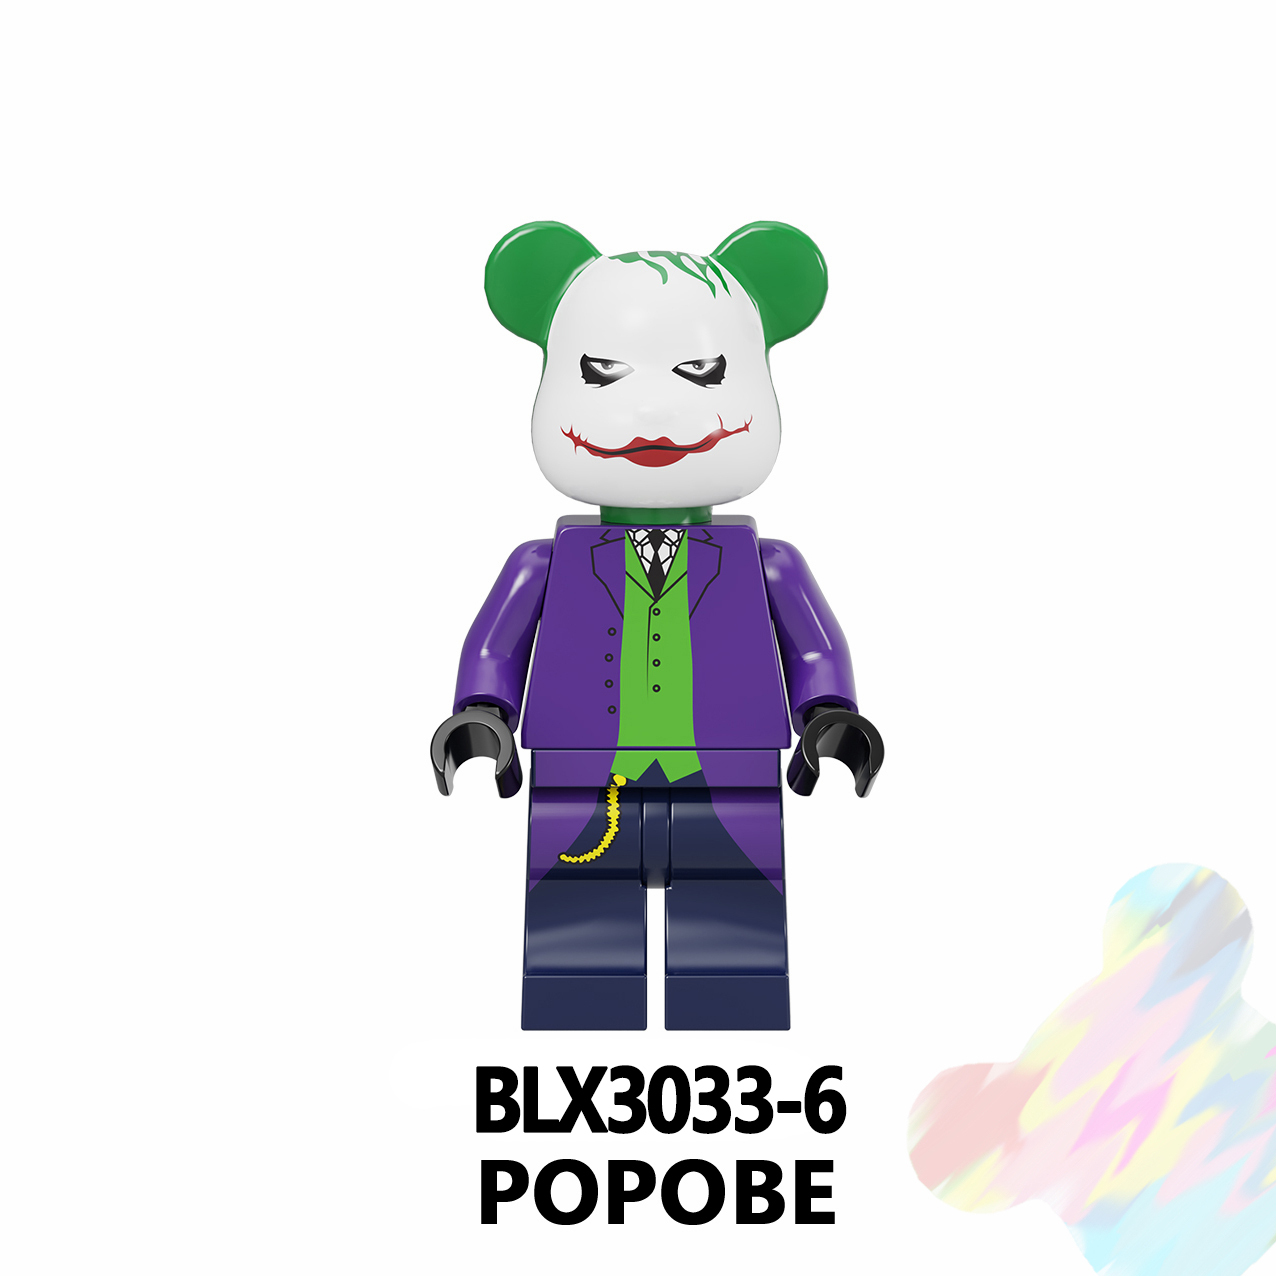 BLX3033-1 BLX3033-2 BLX3033-3 BLX3033-4 BLX3033-5 BLX3033-6 BLX3033-7 BLX3033-8 BLX3033 Gloomy Bear Popobe Cartoon Series Characters Toys Building Block for Kids Gifts 